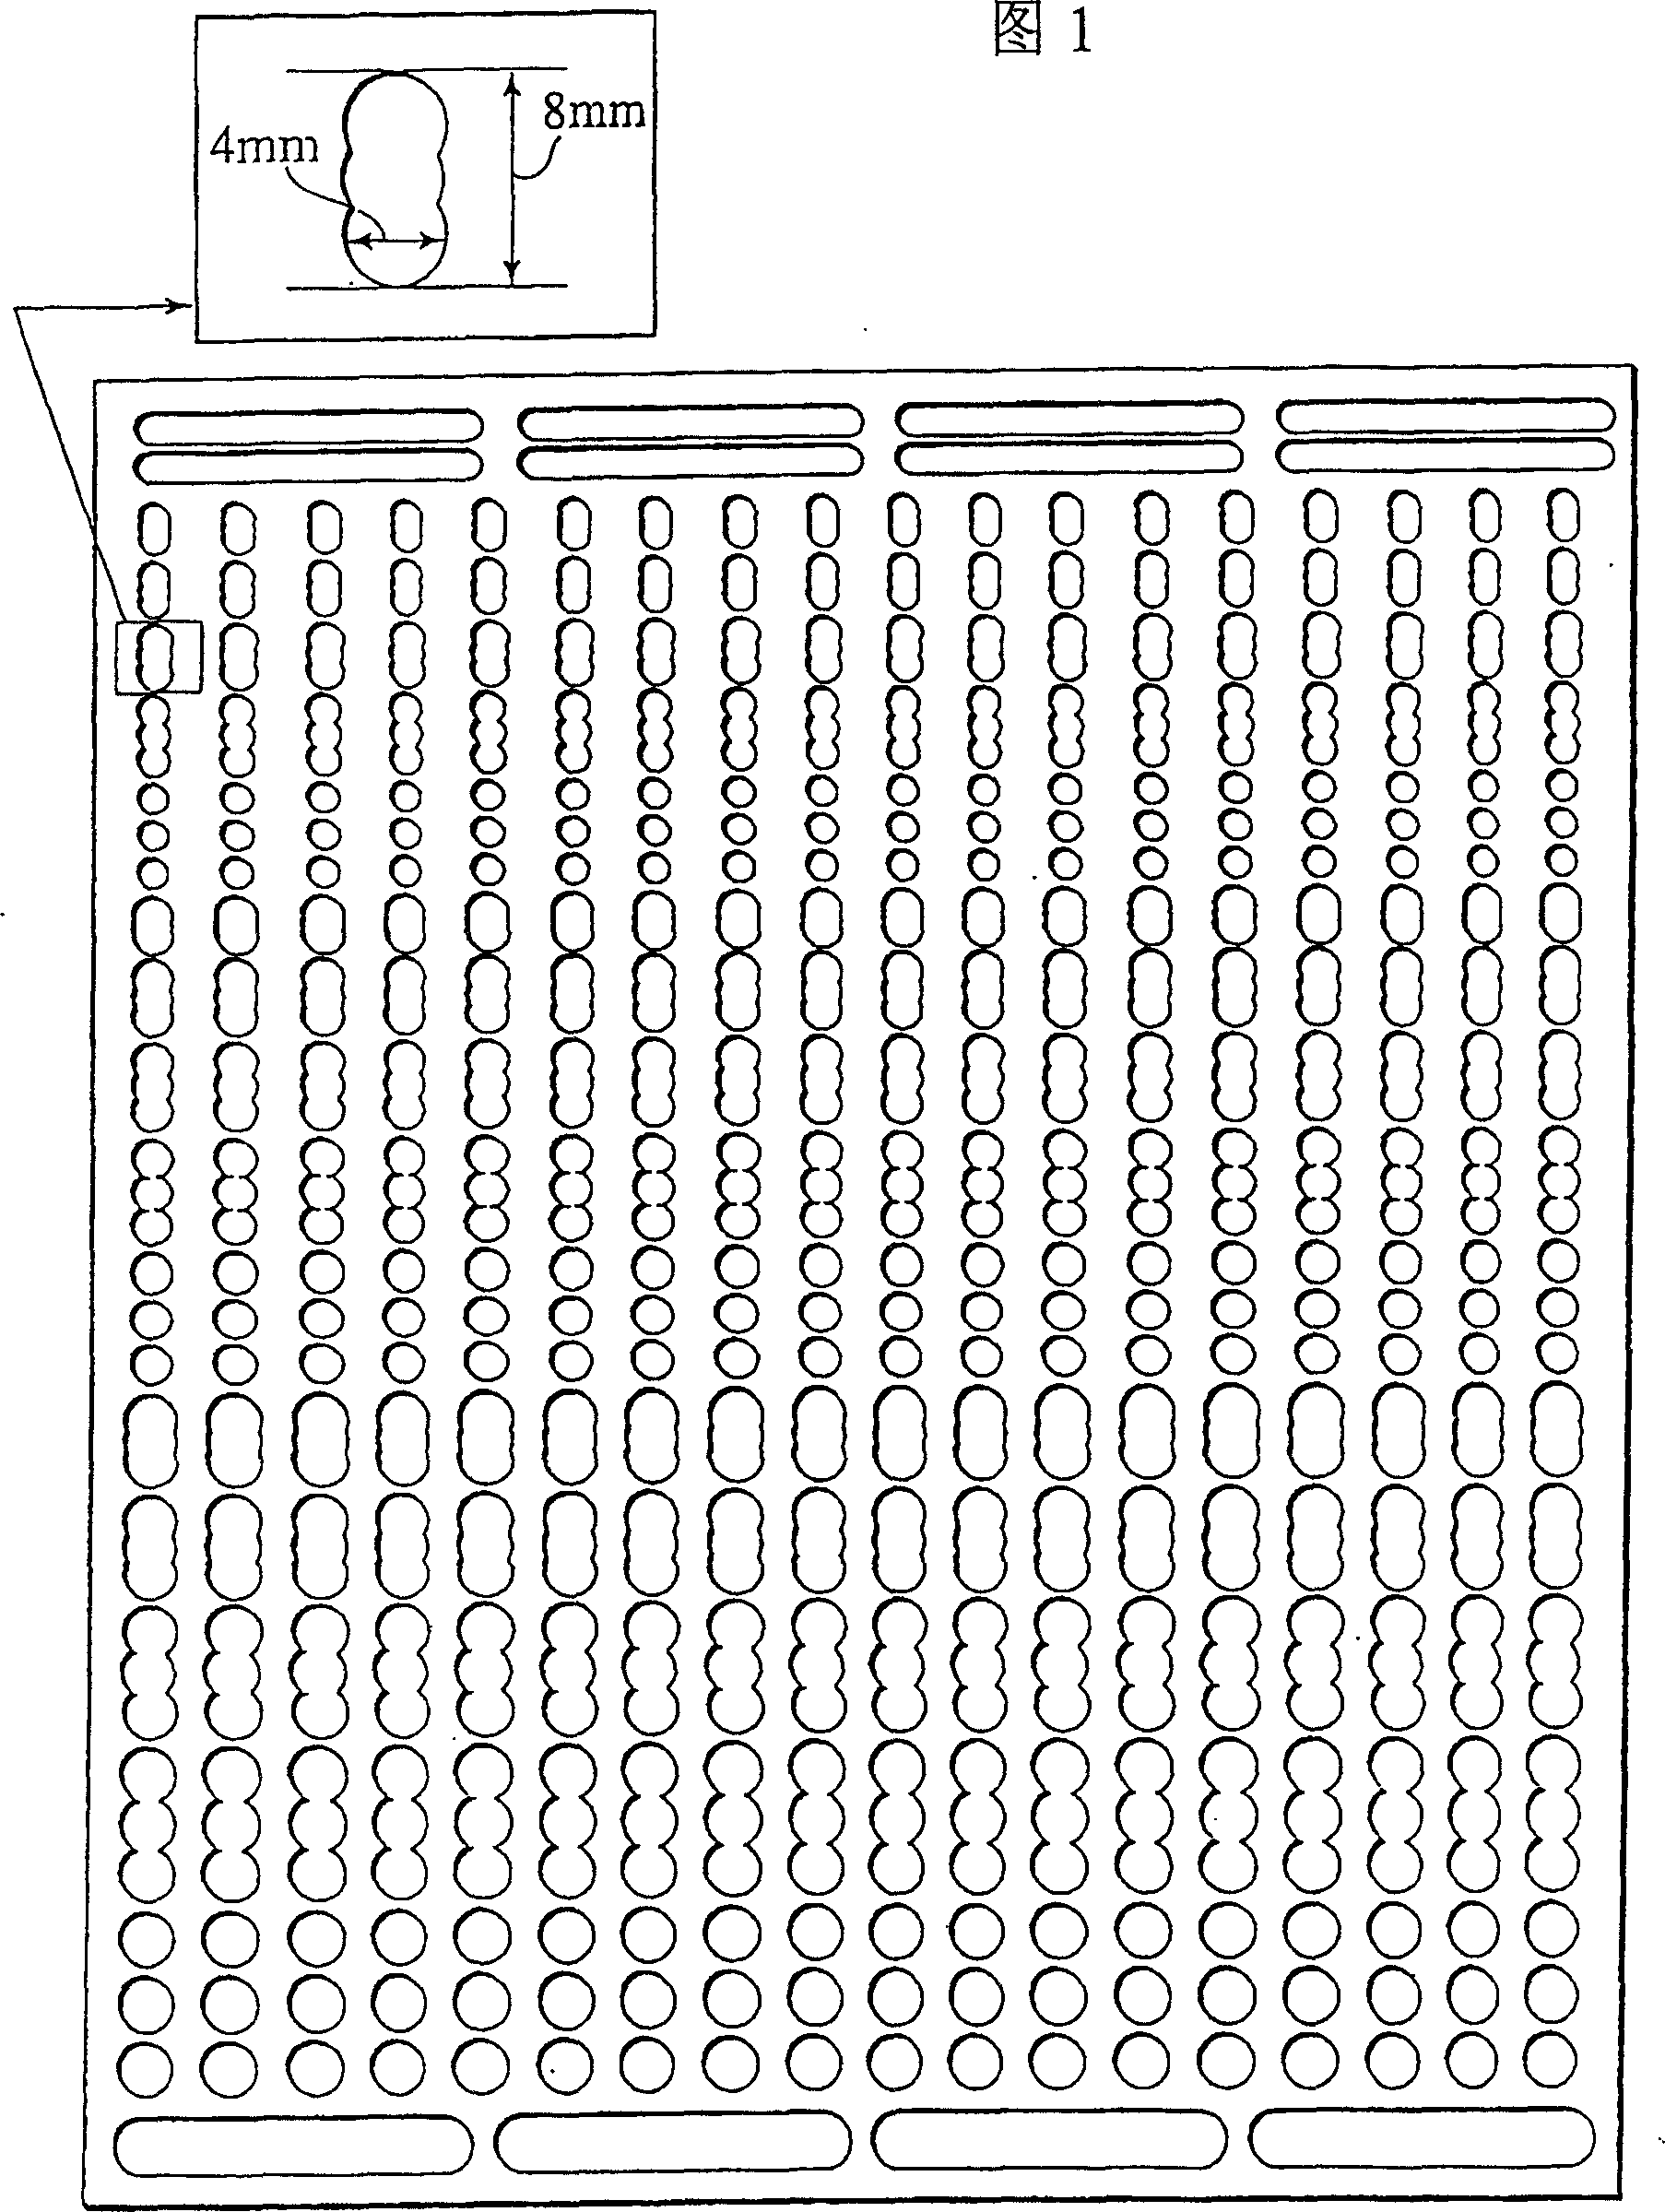 Photosensitive resin compsn., photosensitive element, prodn. method for resist pattern and prodn. method for printed circuit board